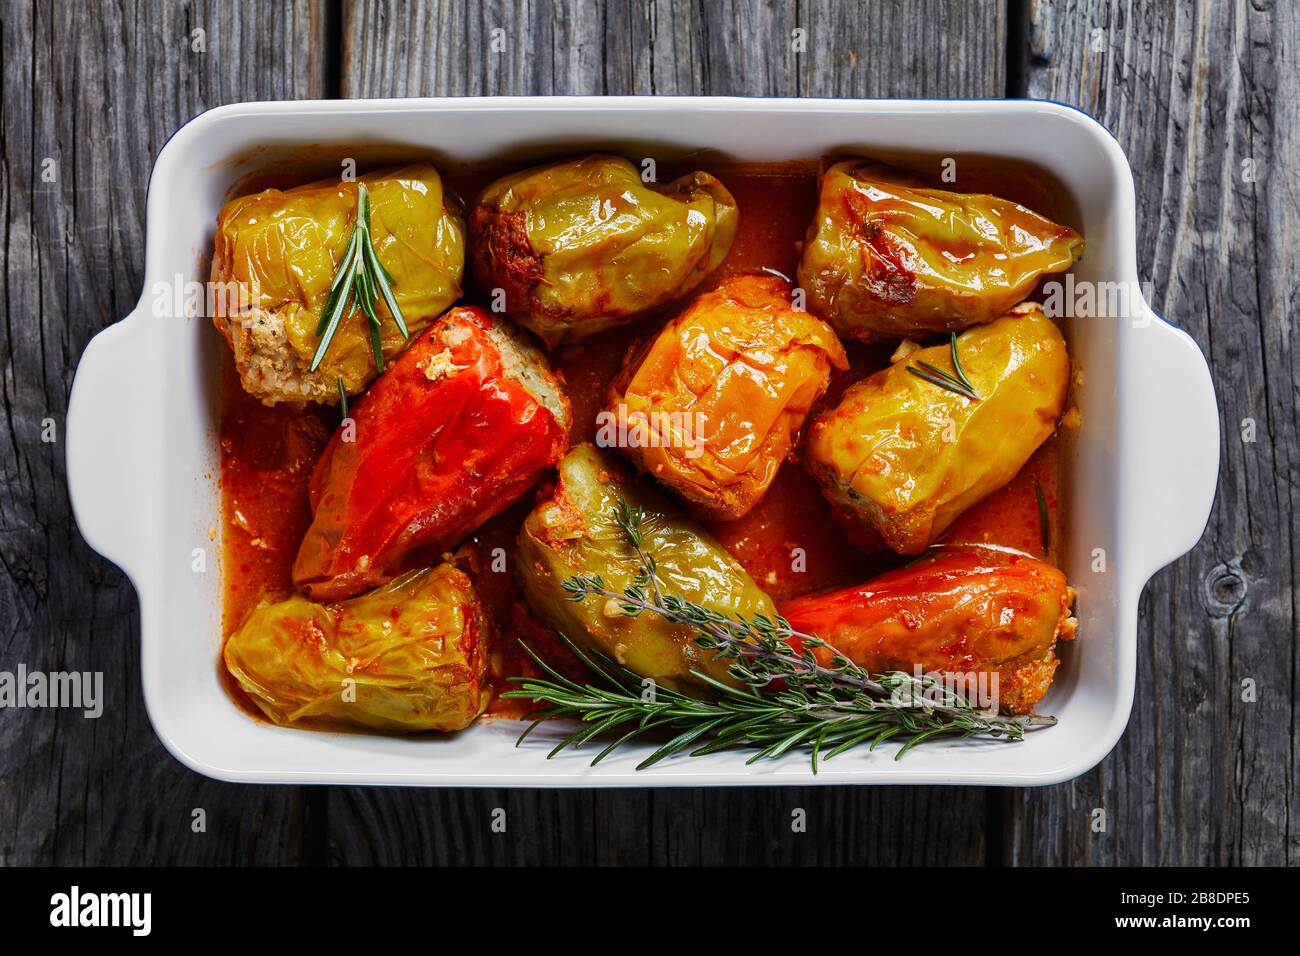 Stuffed bell peppers with rice and minced meat: beef and pork with tomato sauce, rosemary and thyme on top baked on a baking dish, on a wooden backgro Stock Photo